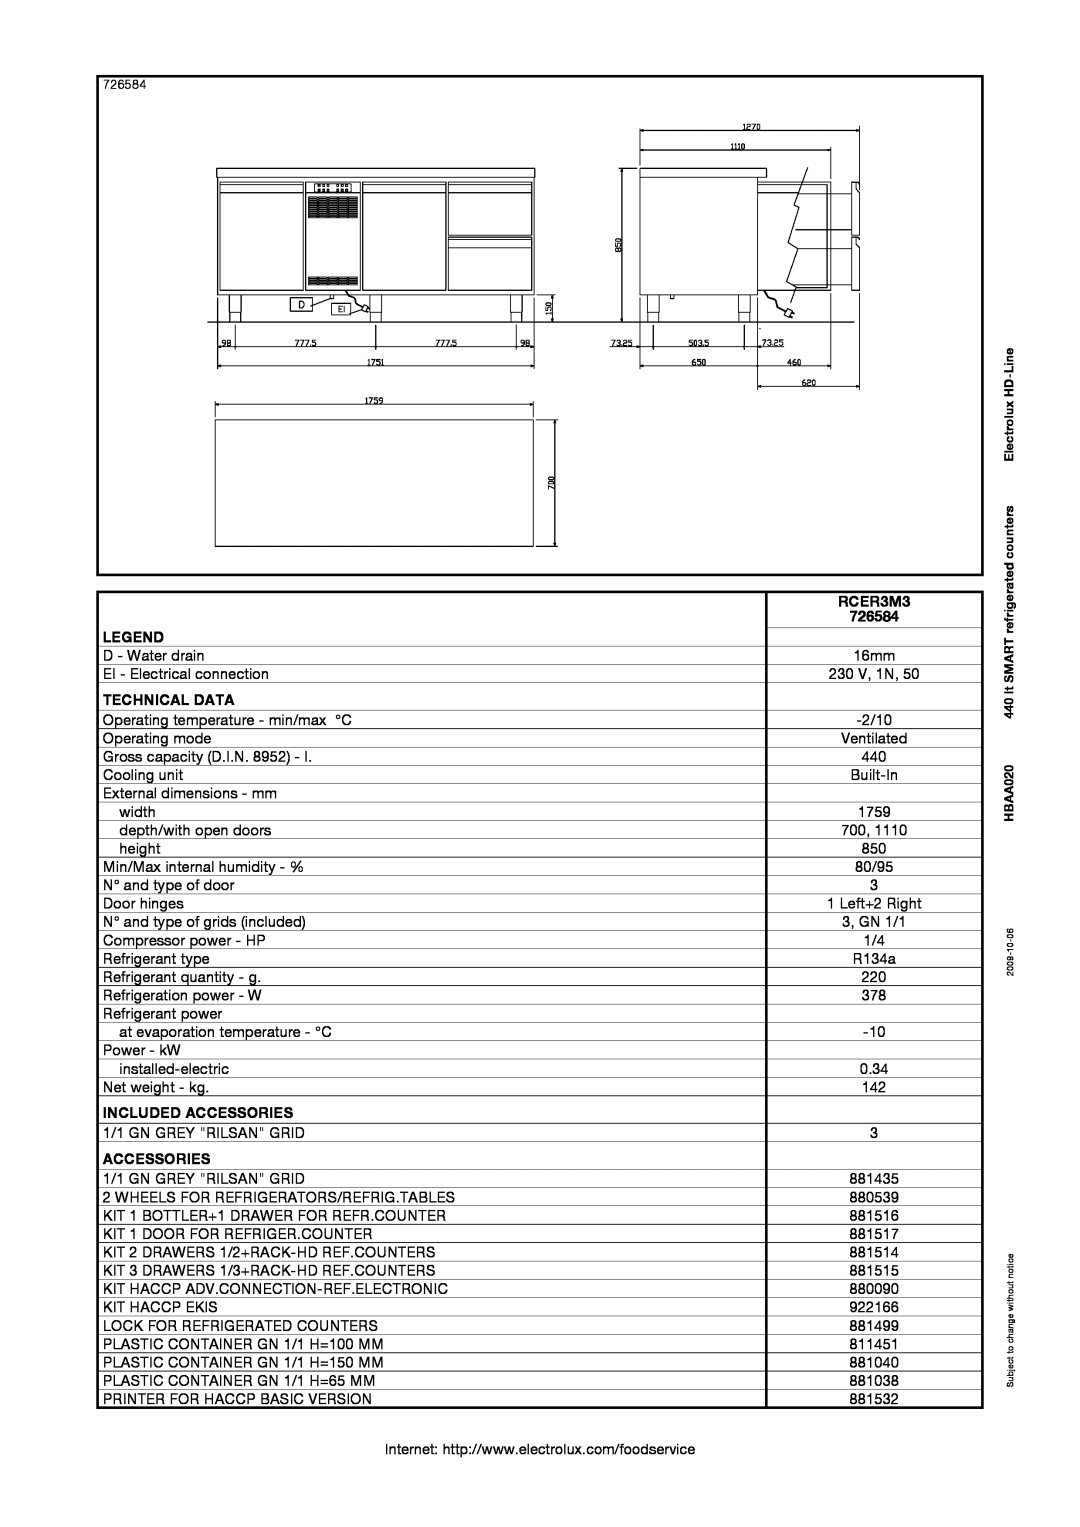 Electrolux manual Technical Data, Included Accessories, RCER3M3 726584 